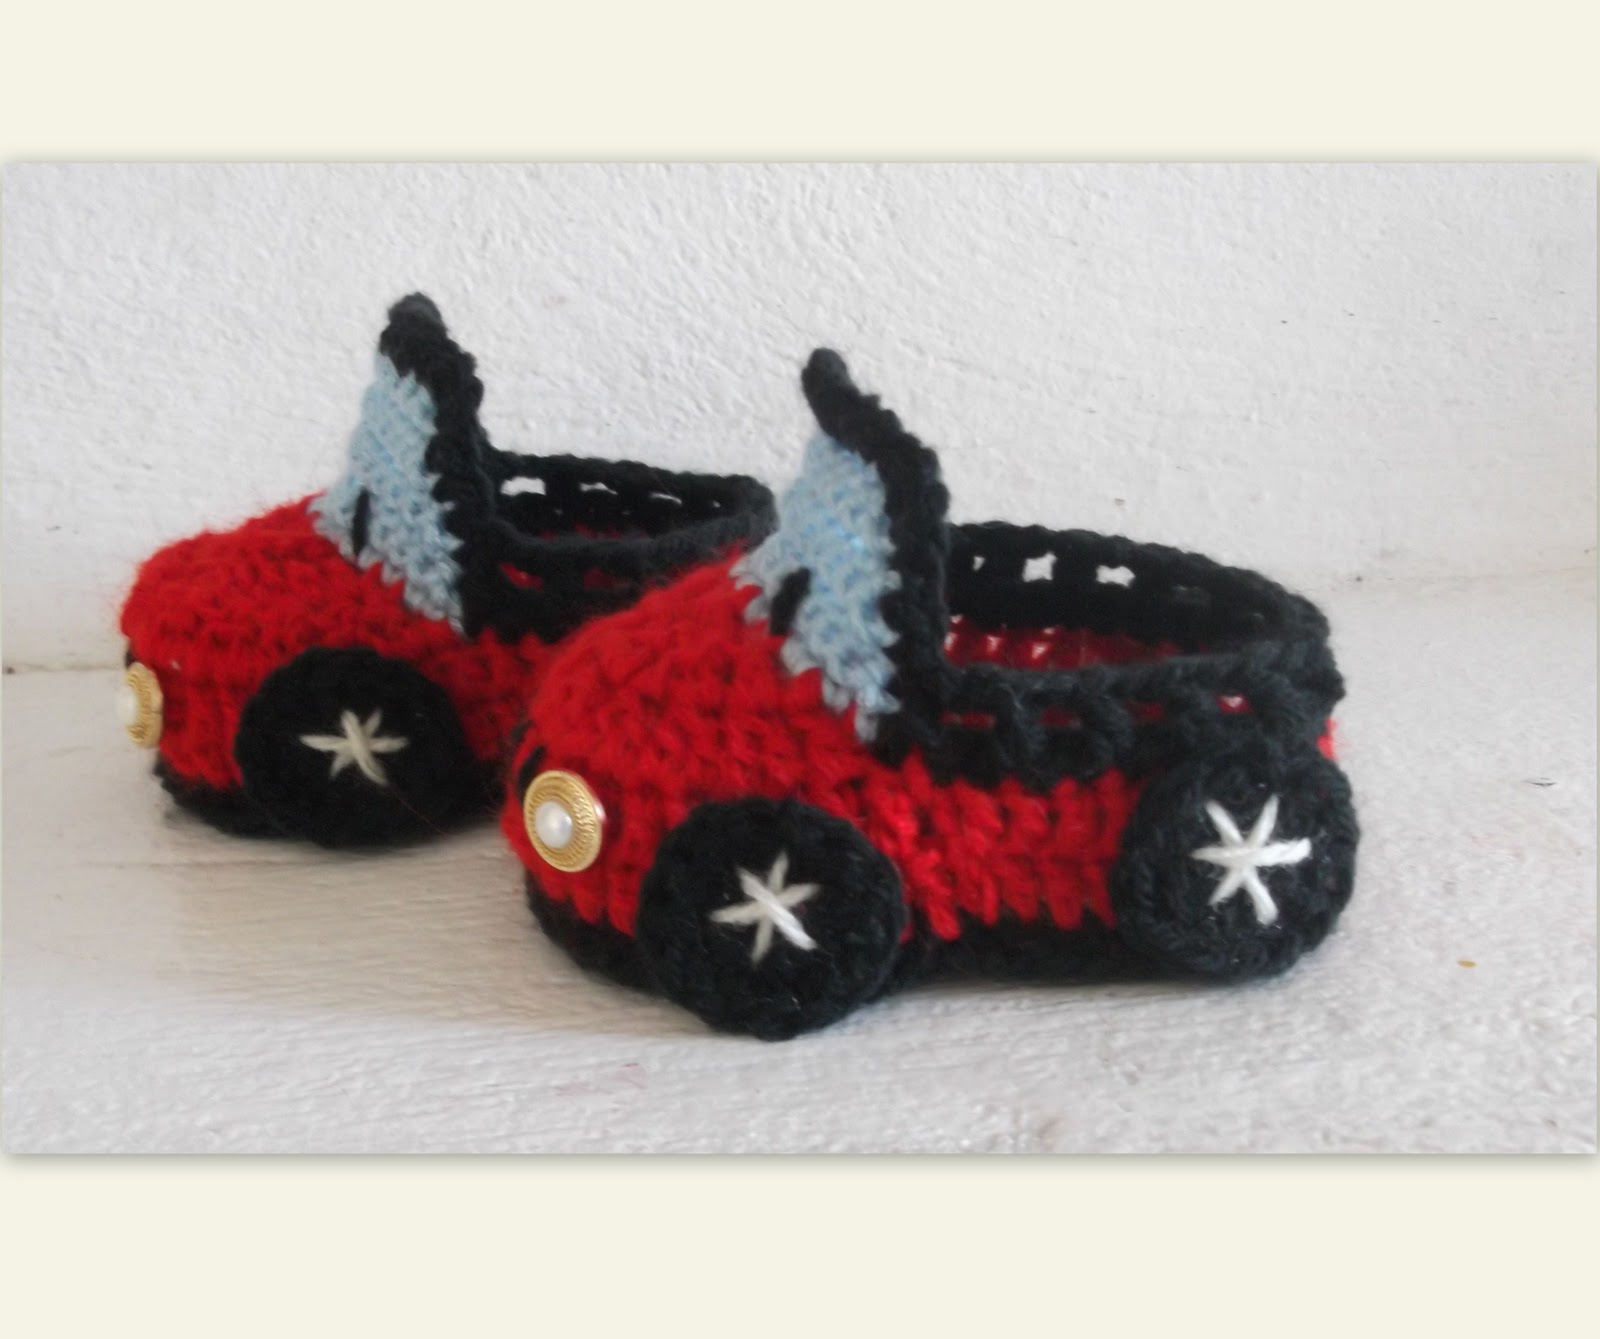 Over 100 Free Crocheted Baby Booties Patterns at AllCrafts